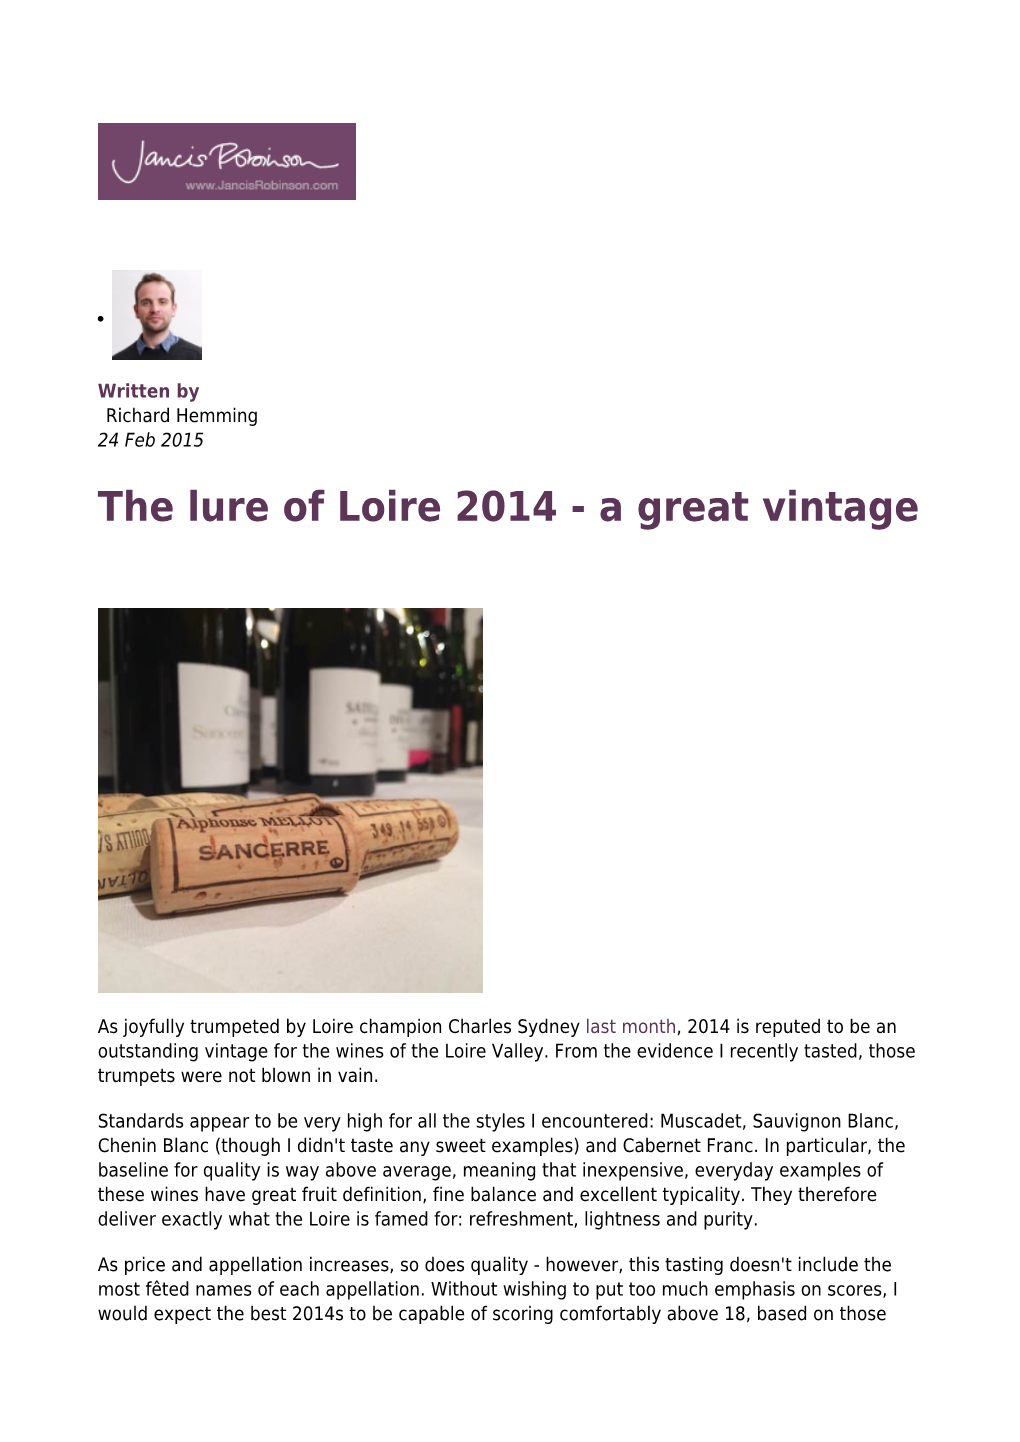 The Lure of Loire 2014 - a Great Vintage